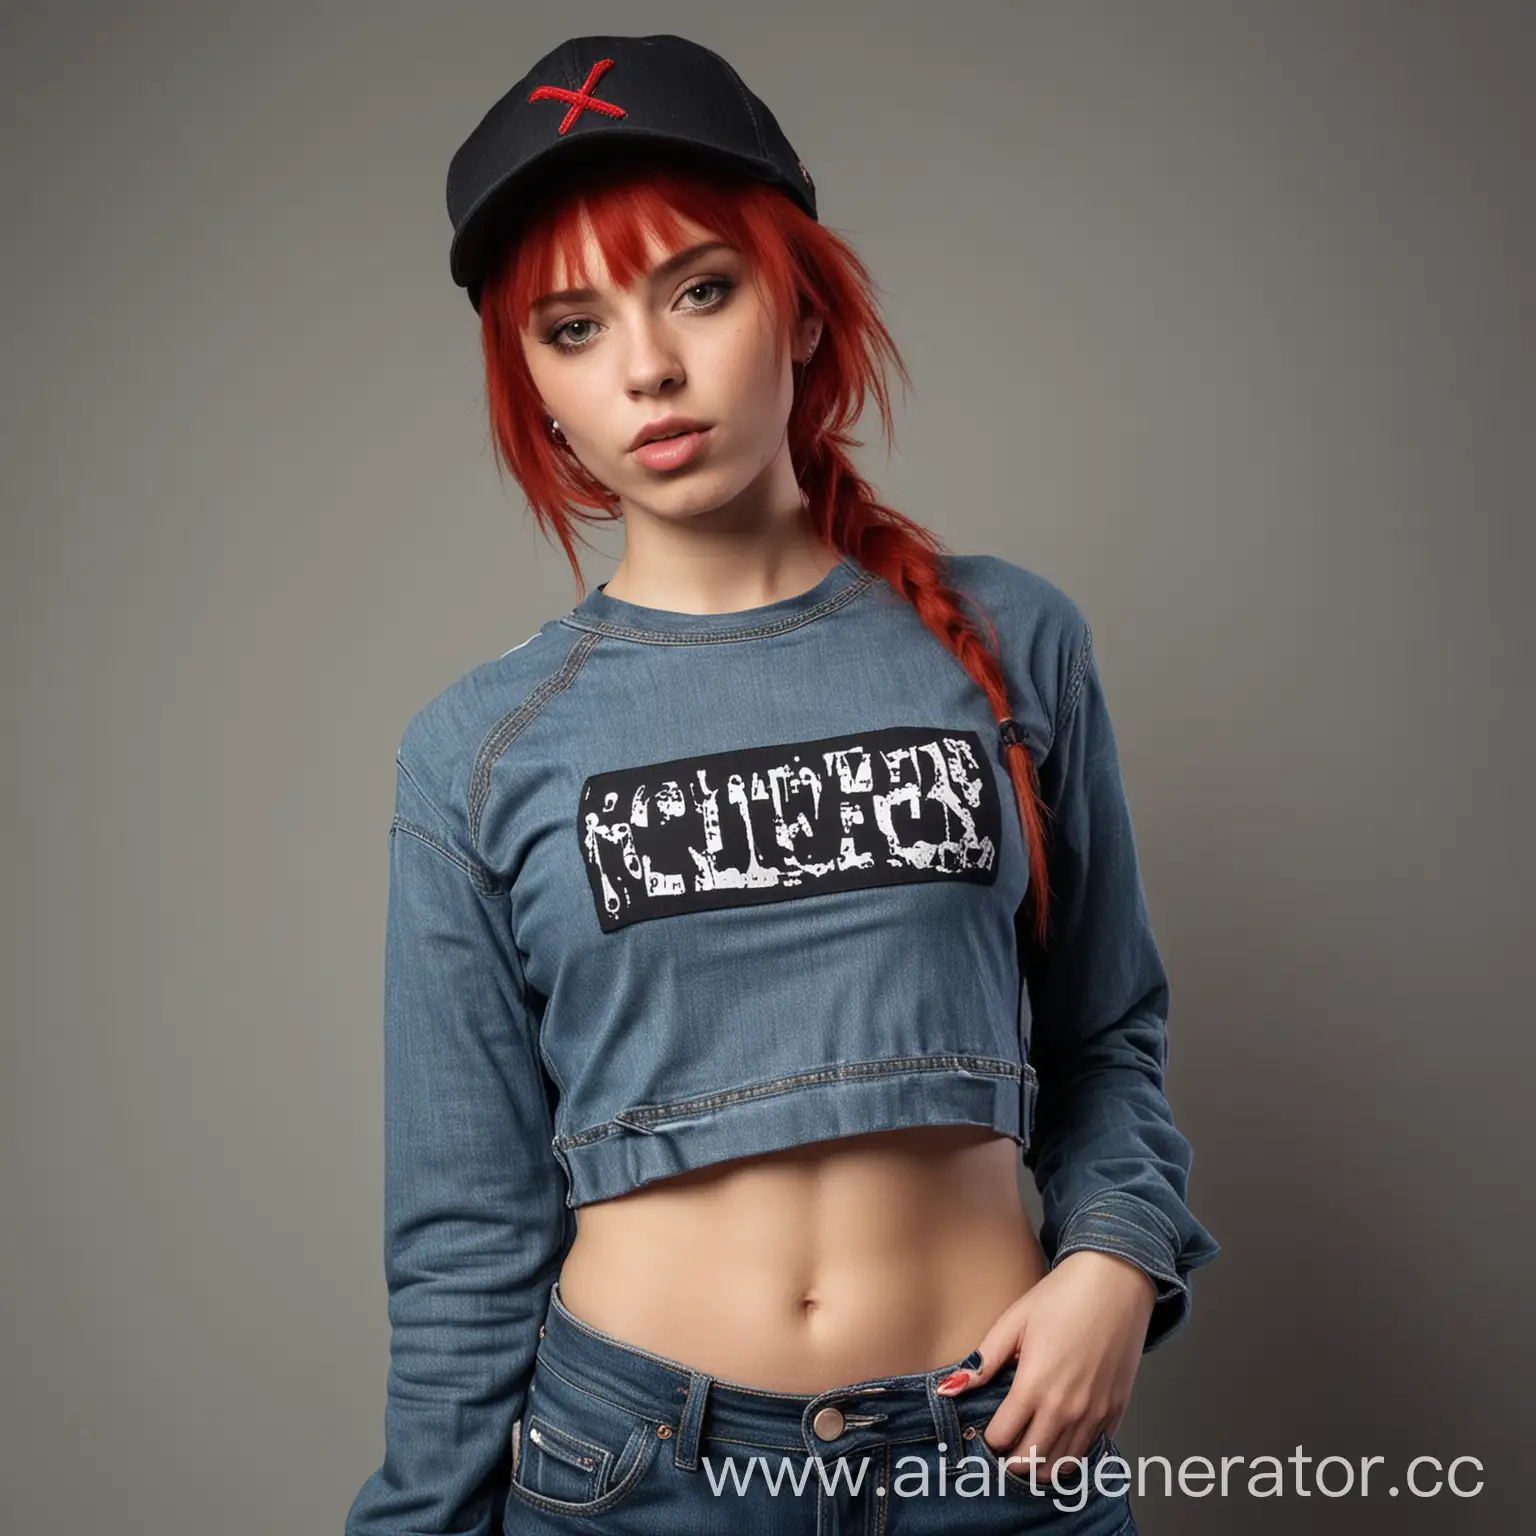 Rebellious-RedHaired-Teen-in-Casual-Streetwear-with-Nose-Piercing